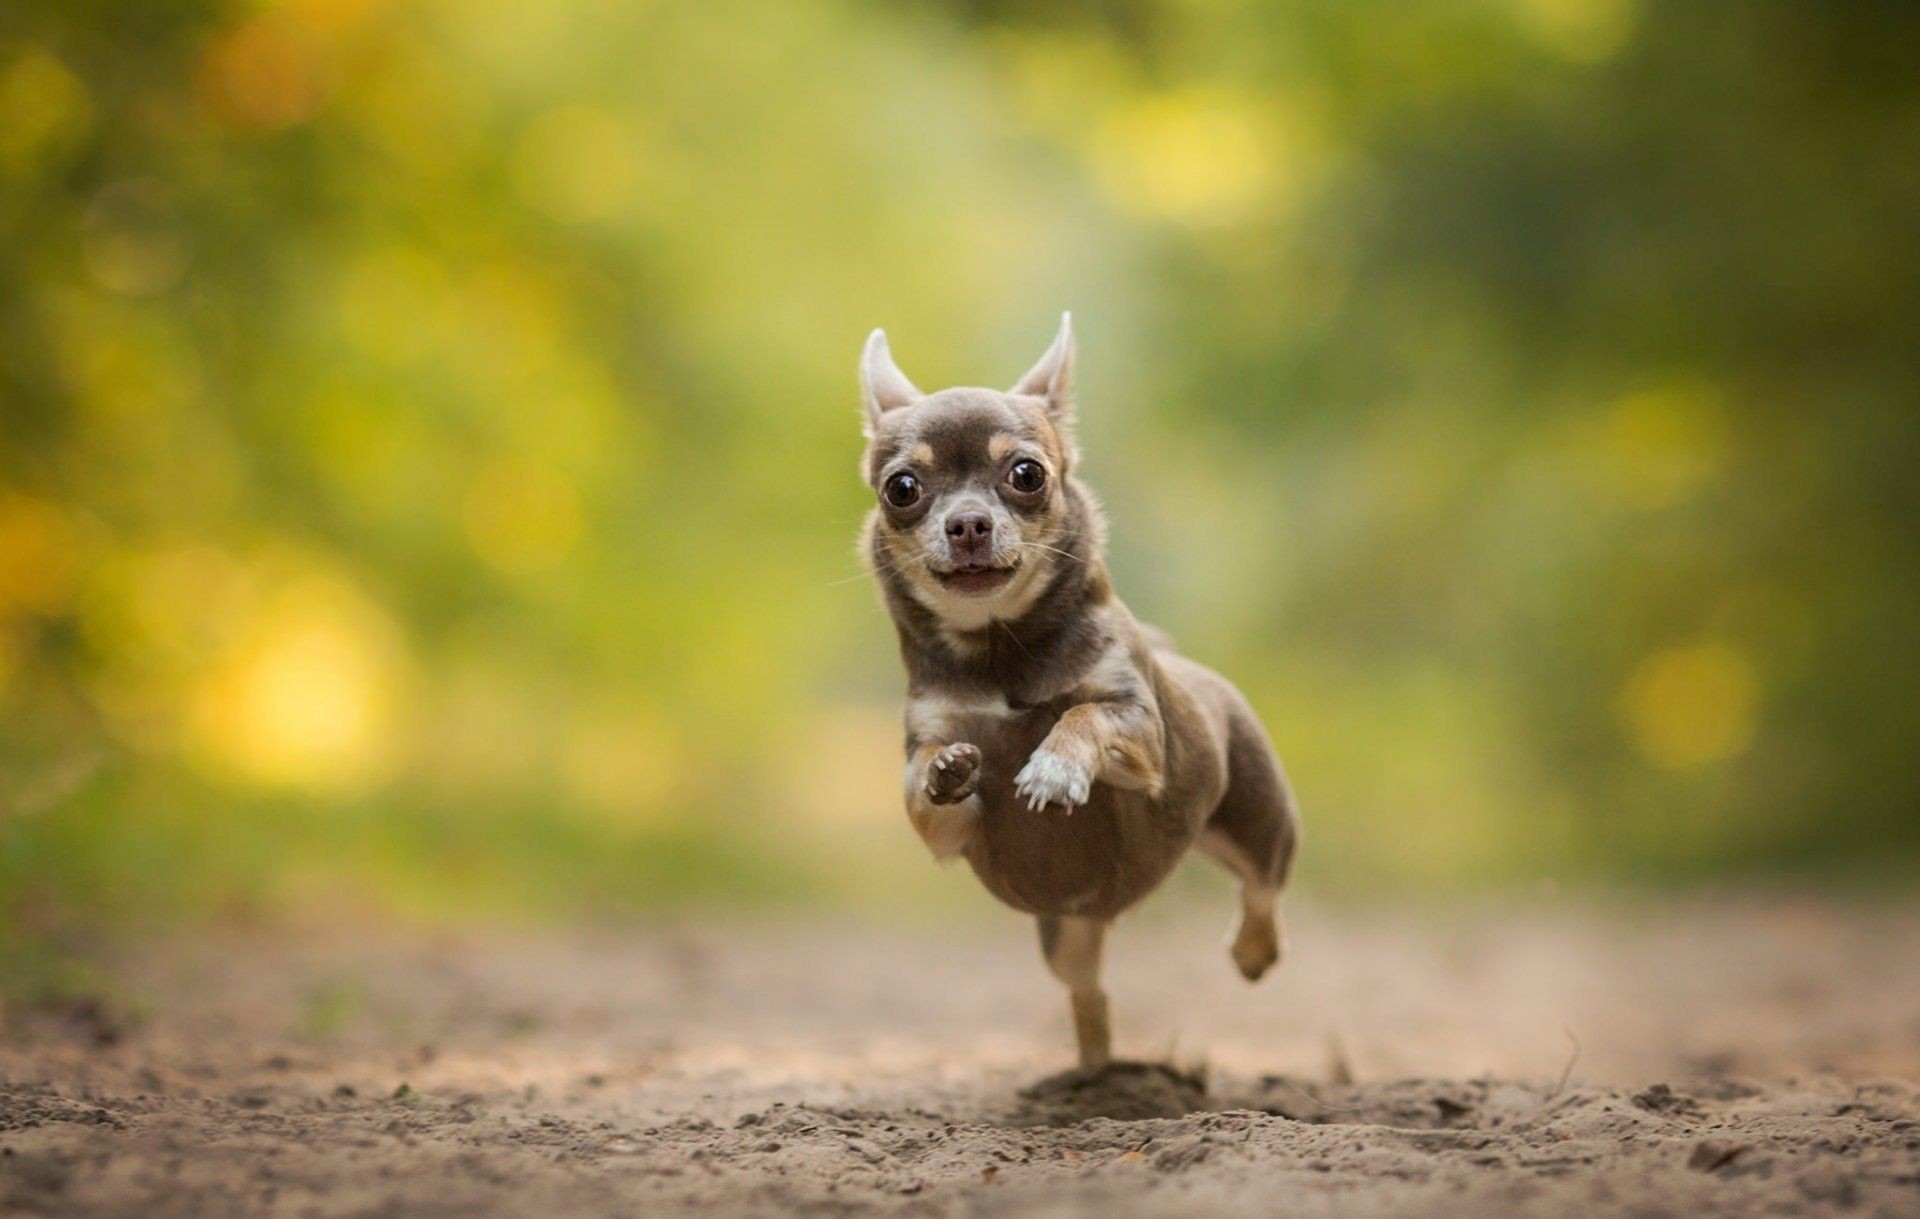 Chihuahua Wallpaper background picture